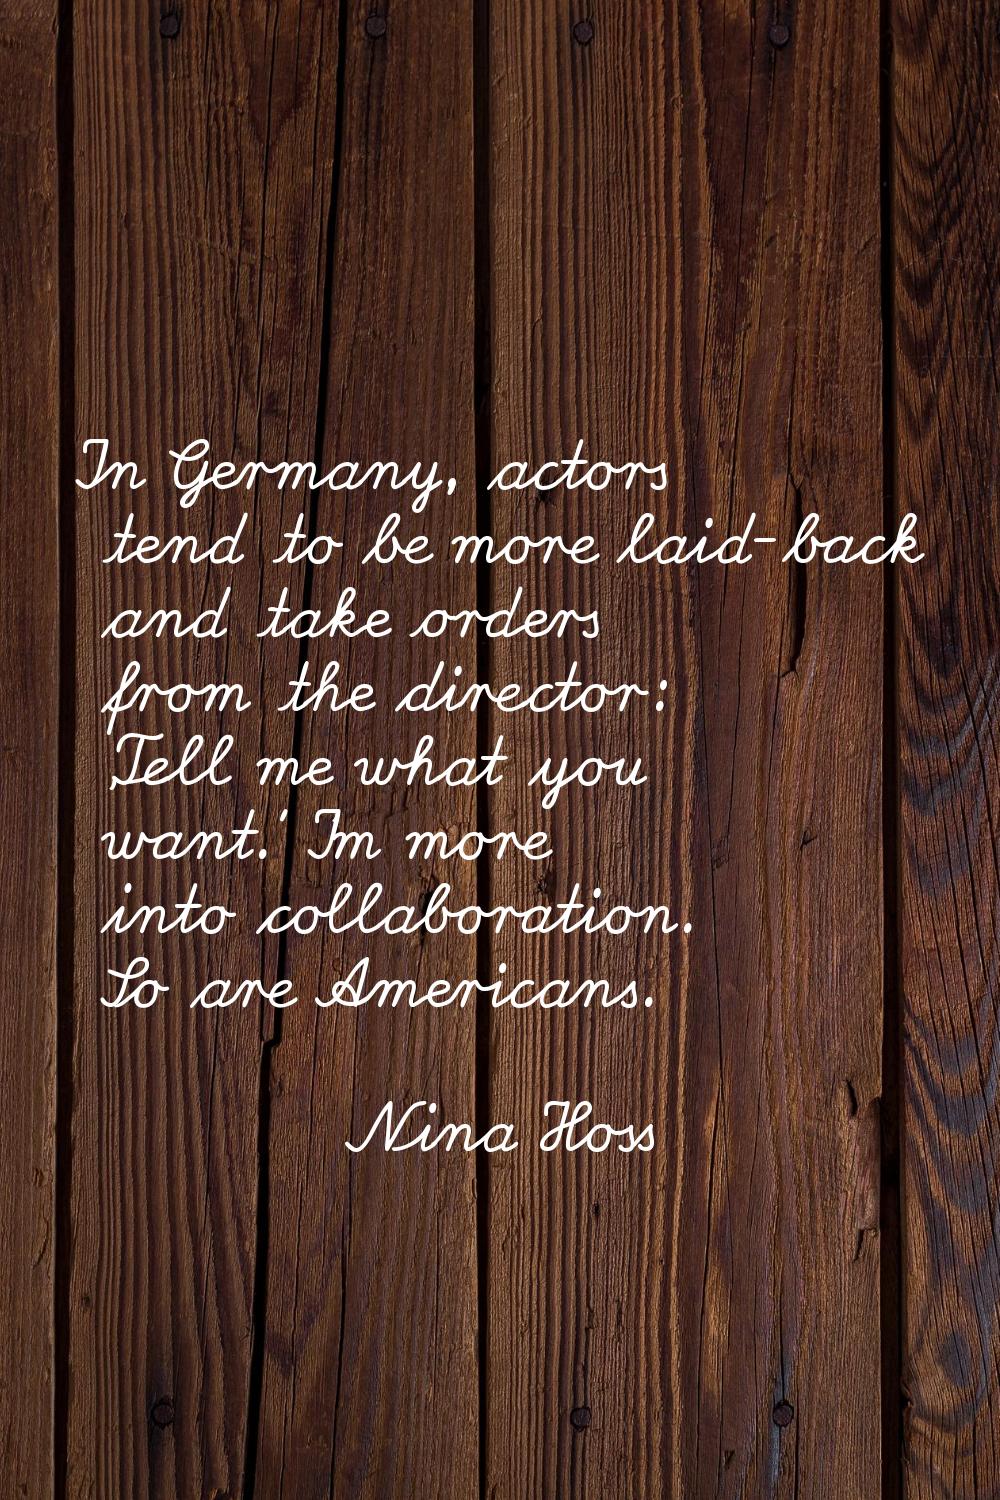 In Germany, actors tend to be more laid-back and take orders from the director: 'Tell me what you w